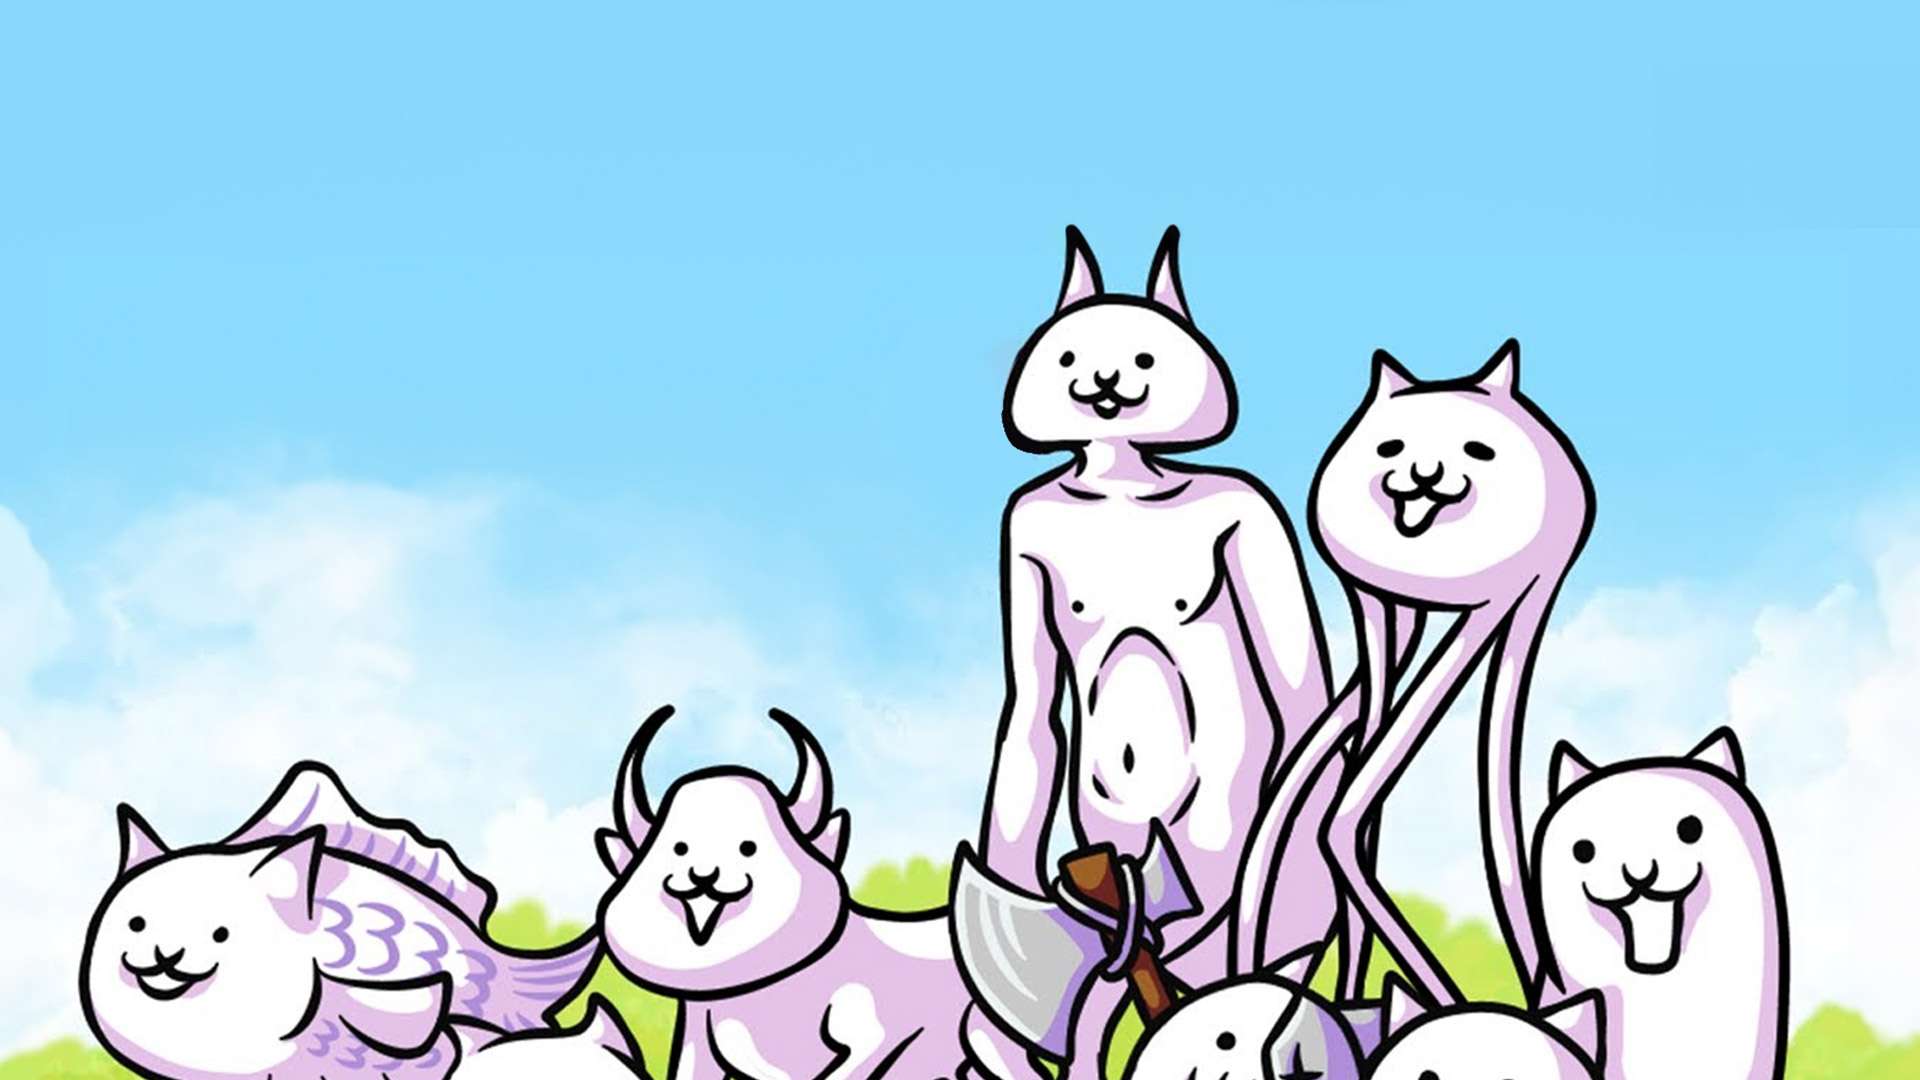 max level battle cats all cats